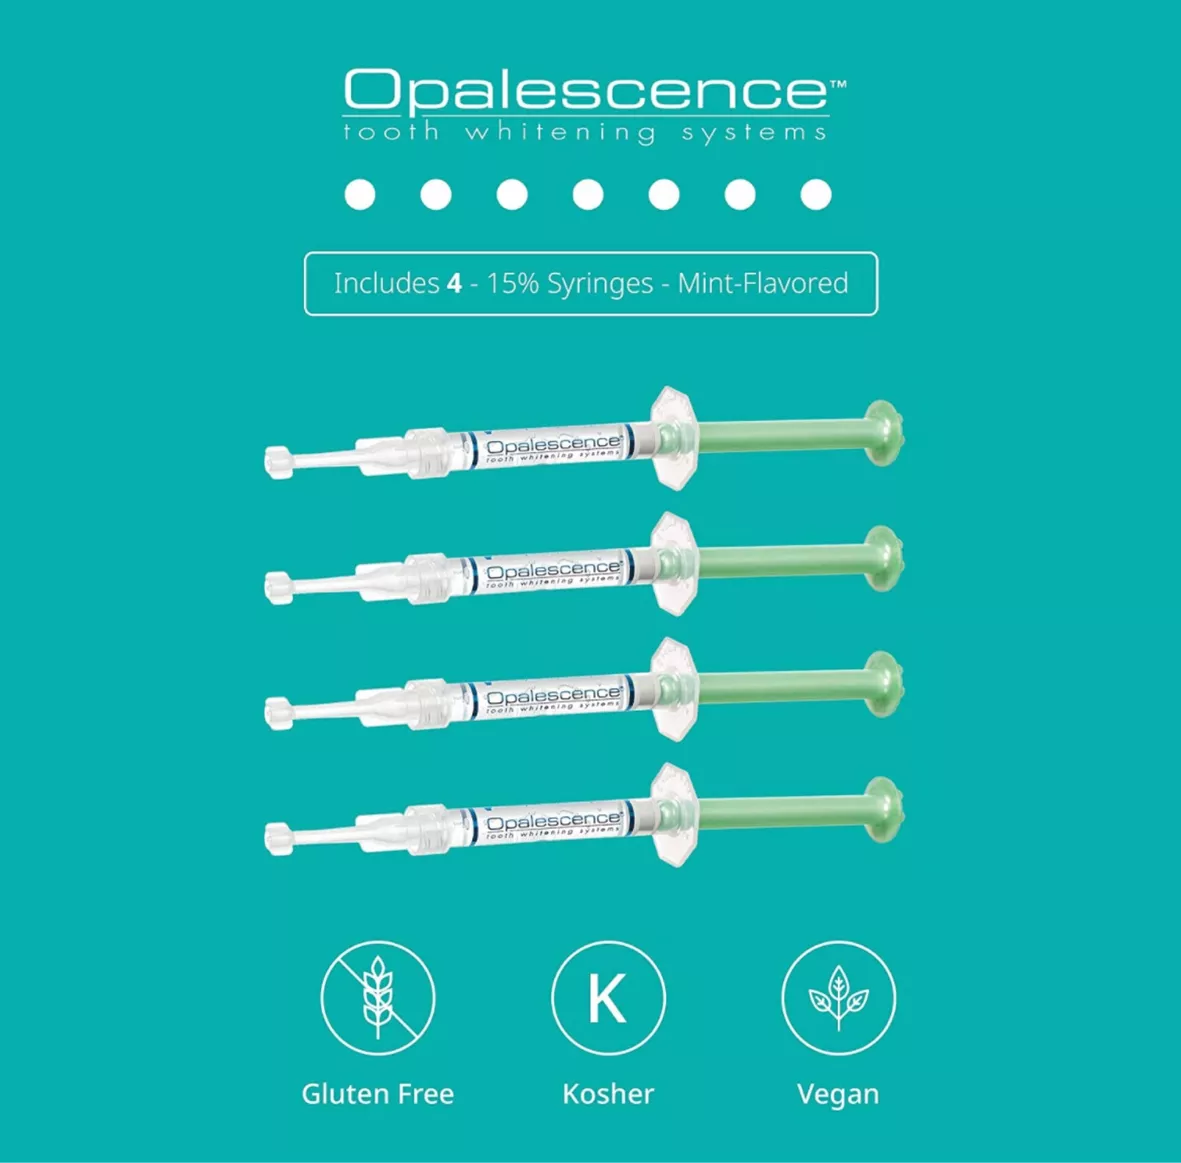 Opalescence Go 15% Teeth Whitening Trays (4 pack, Mint Flavor, Boxed)